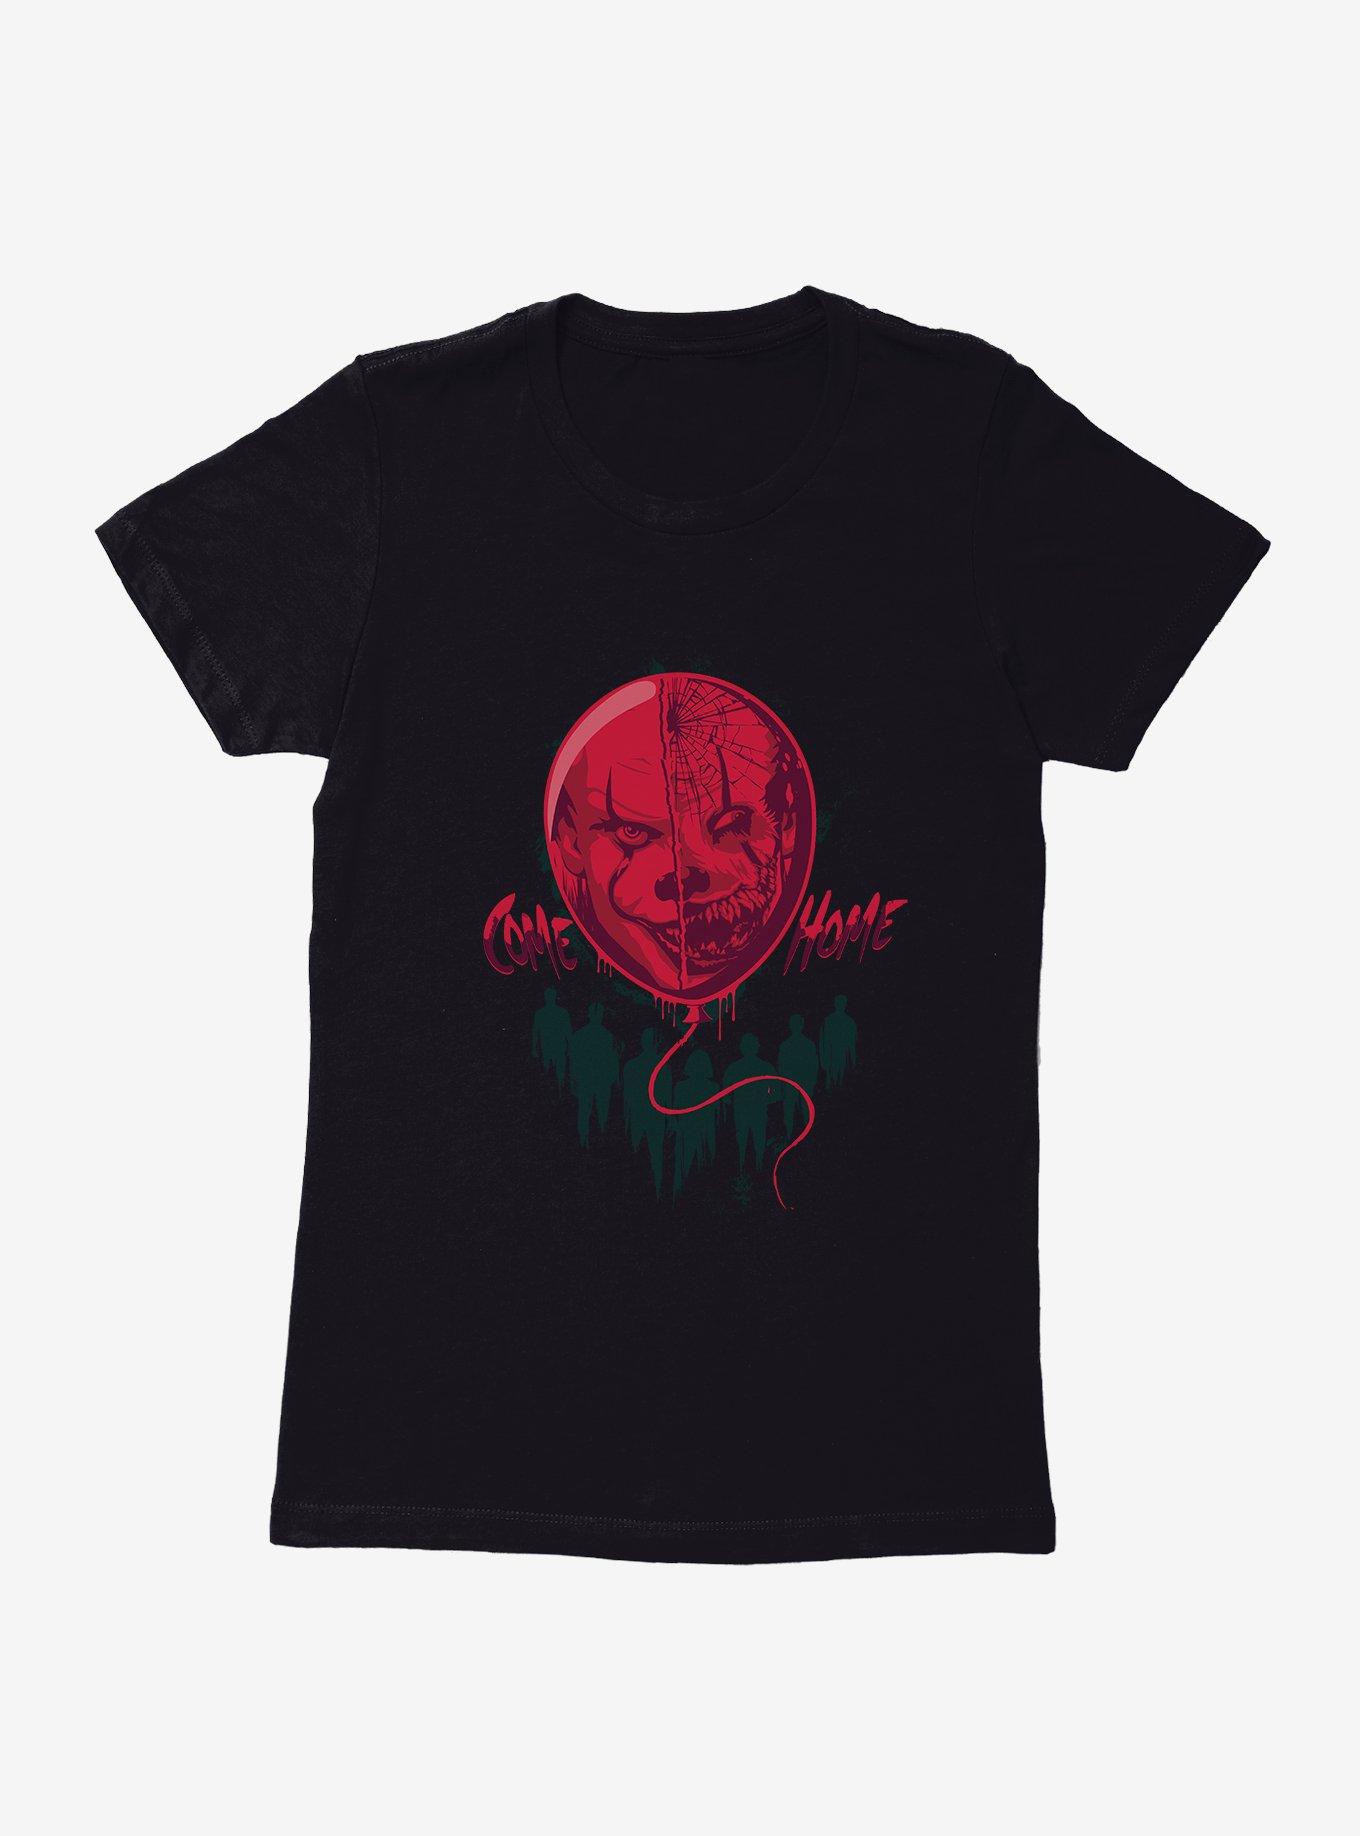 IT Chapter Two Come Home Floating Balloon Womens T-Shirt, BLACK, hi-res